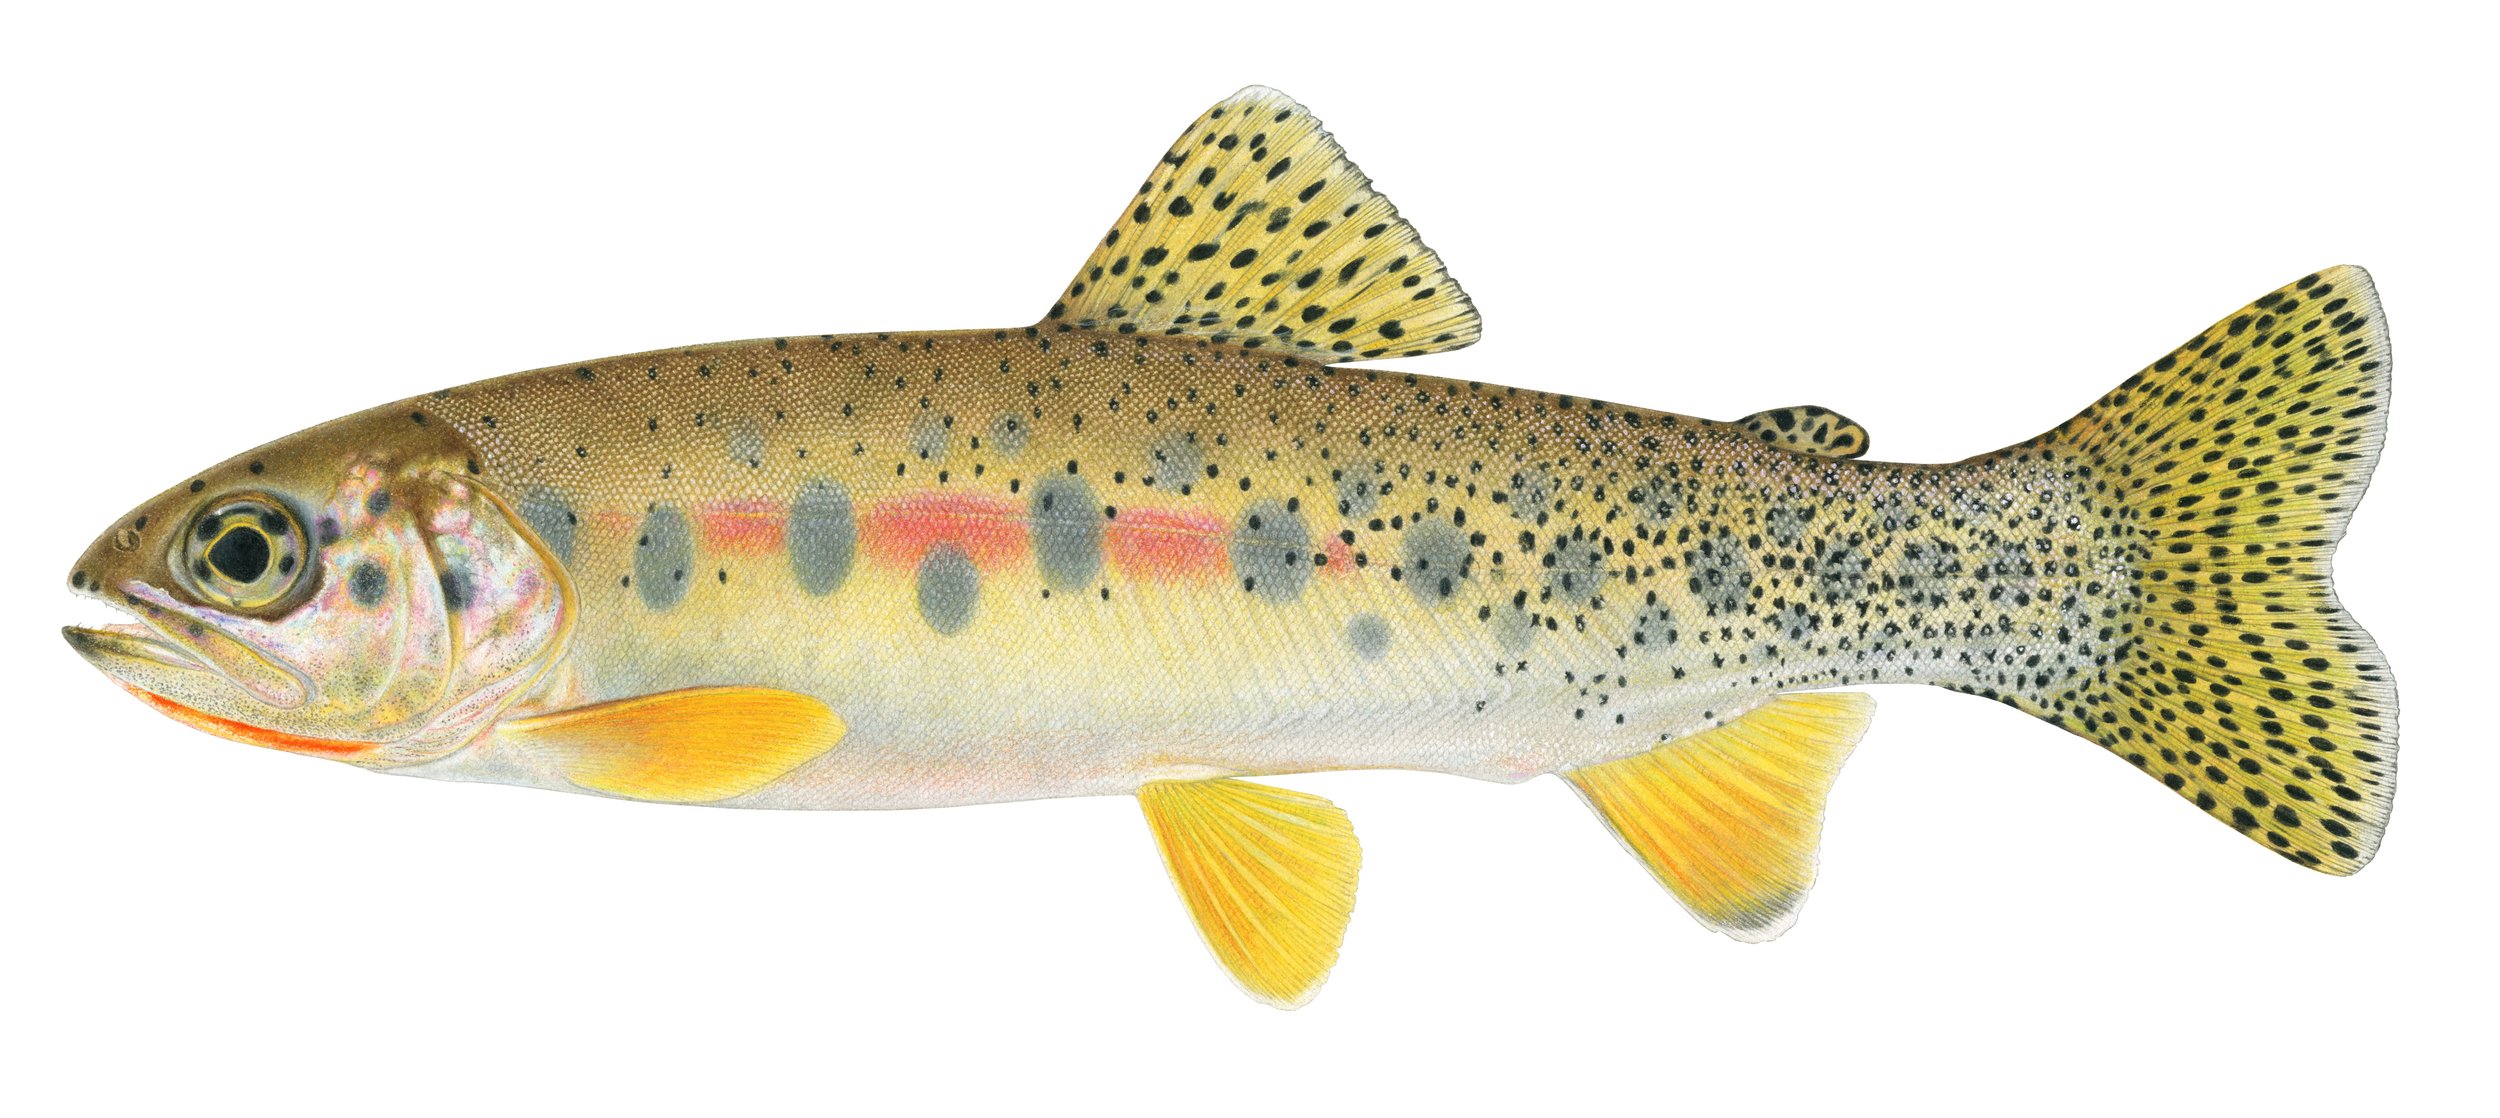 WESTSLOPE CUTTHROAT TROUT